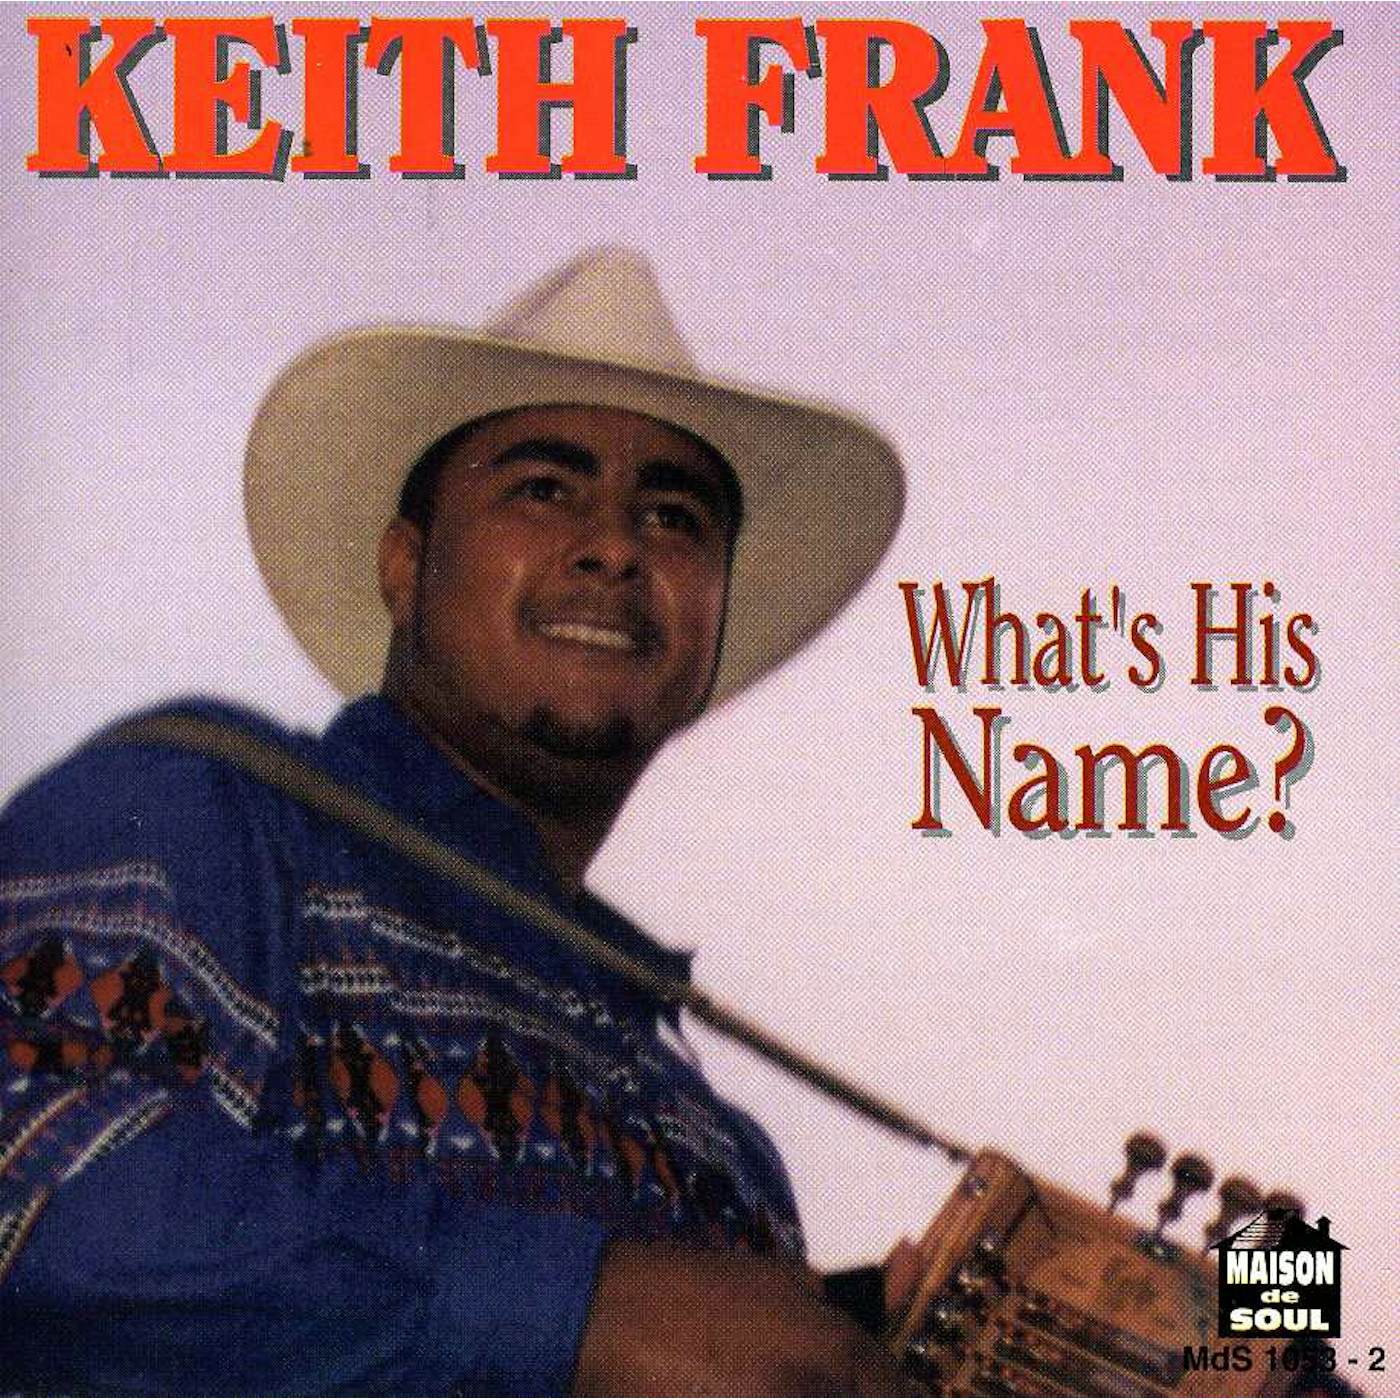 Keith Frank WHAT'S HIS NAME CD